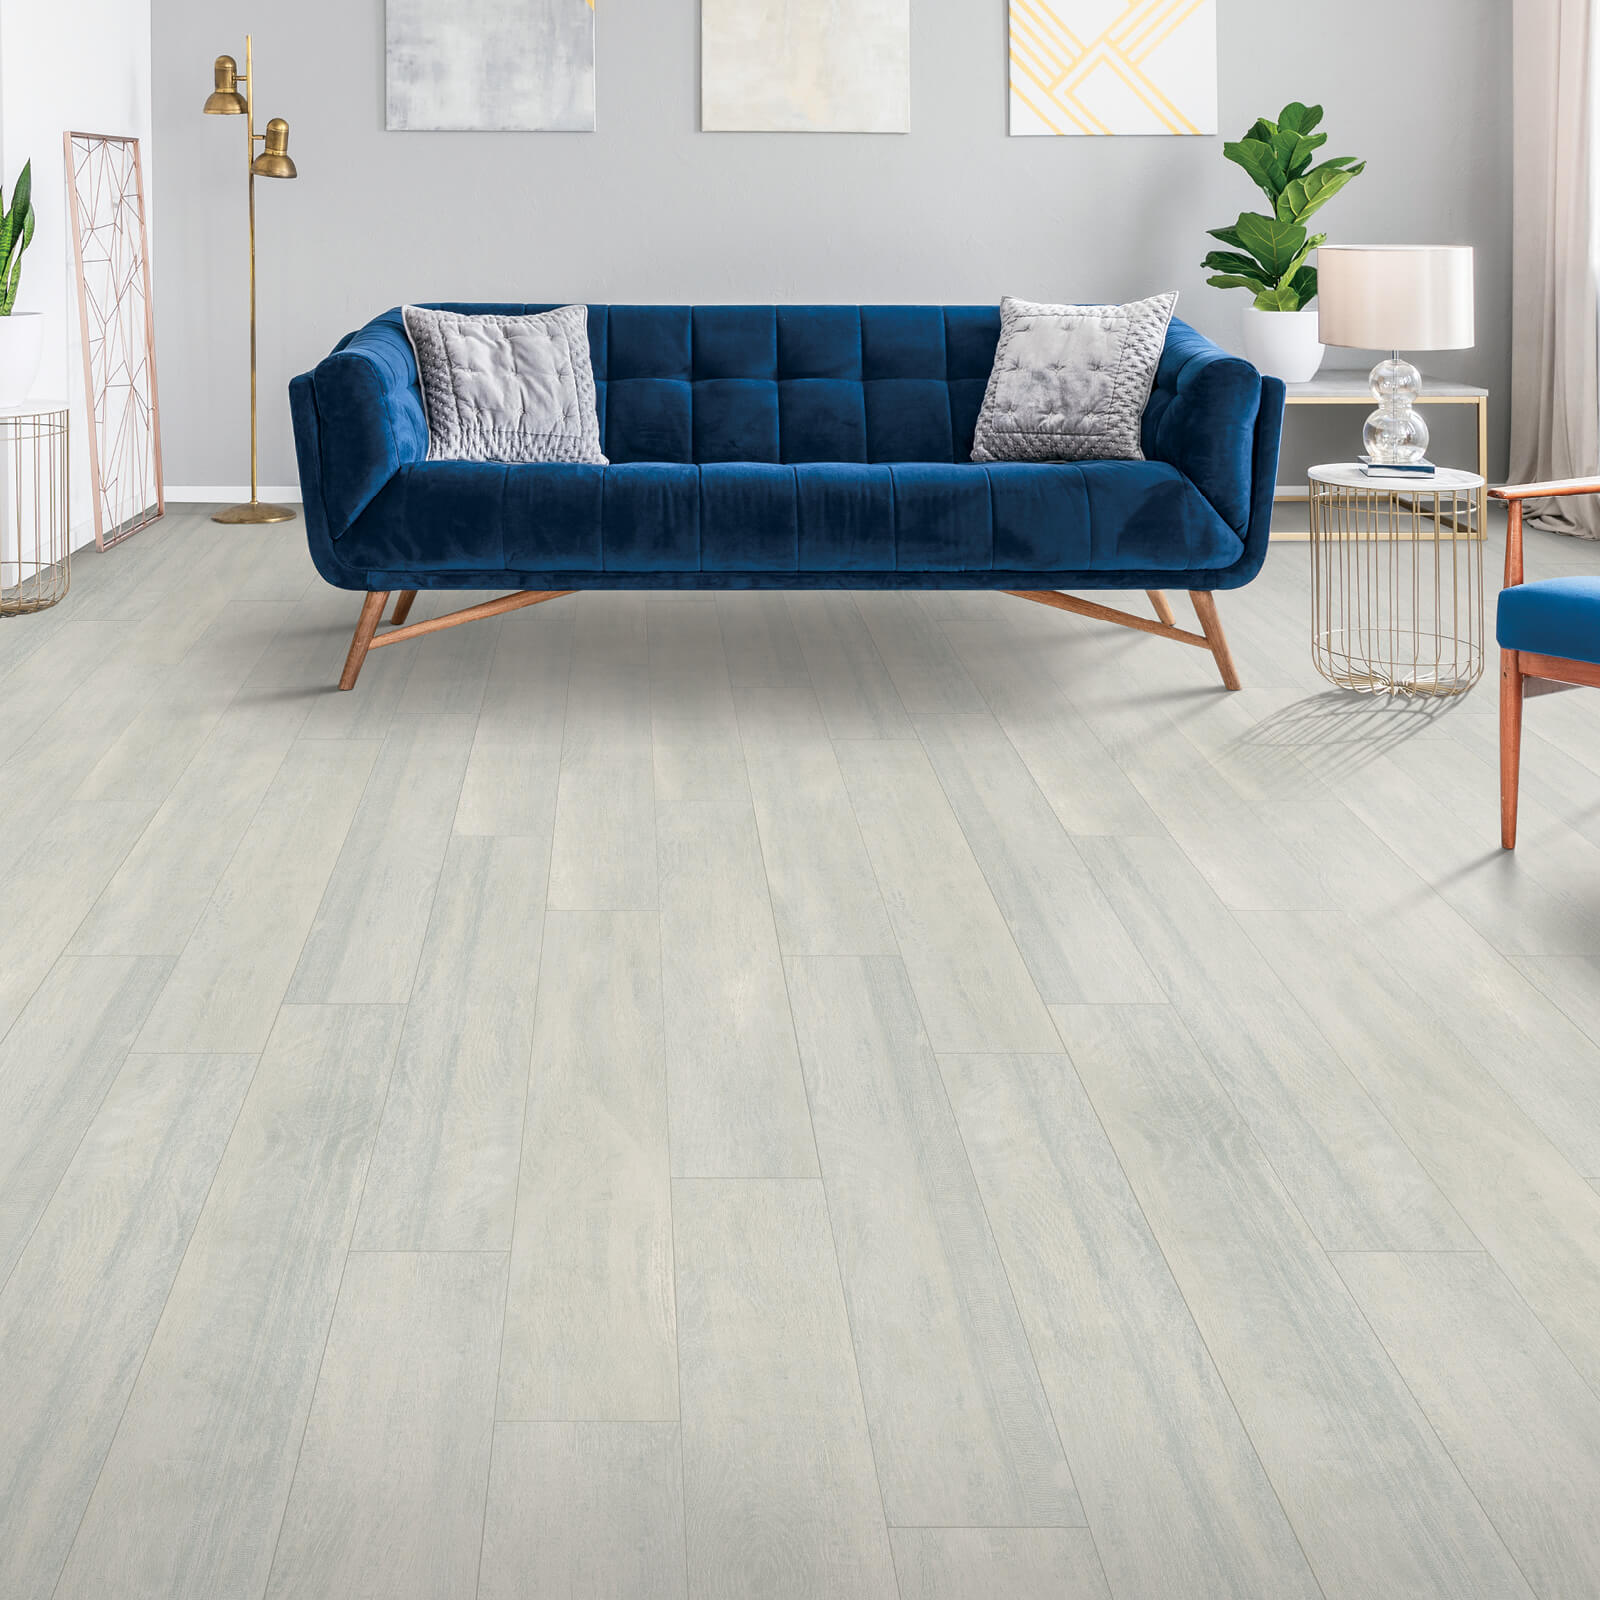 Laminate flooring with blue couch | LeClaire Flooring